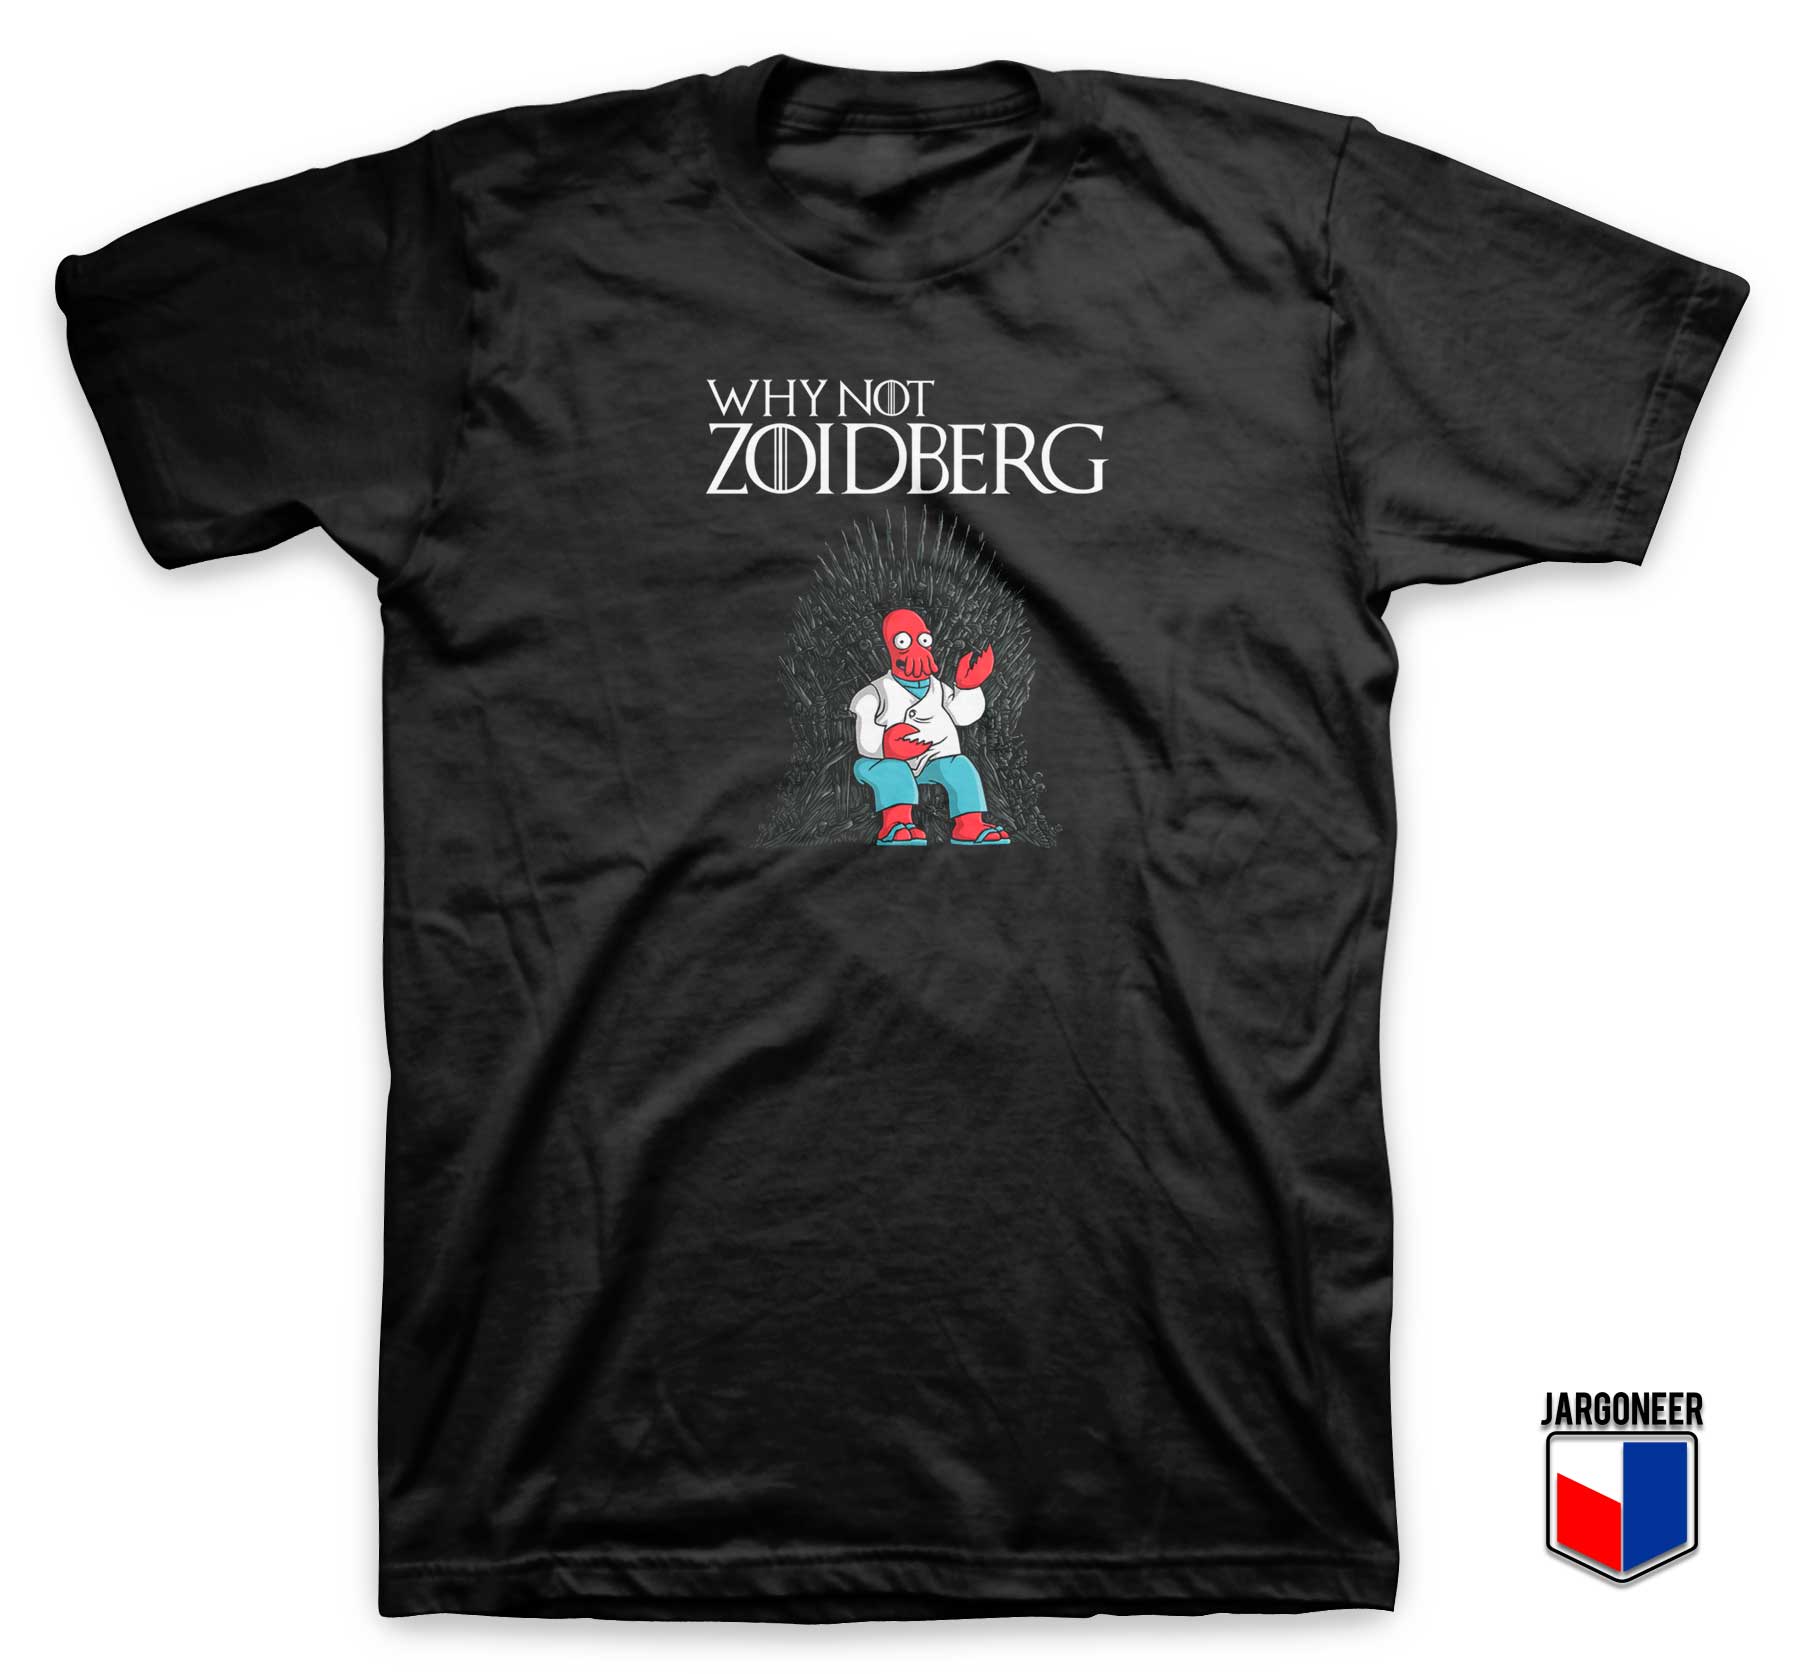 Why Not Zoidberg Parody T Shirt - Shop Unique Graphic Cool Shirt Designs